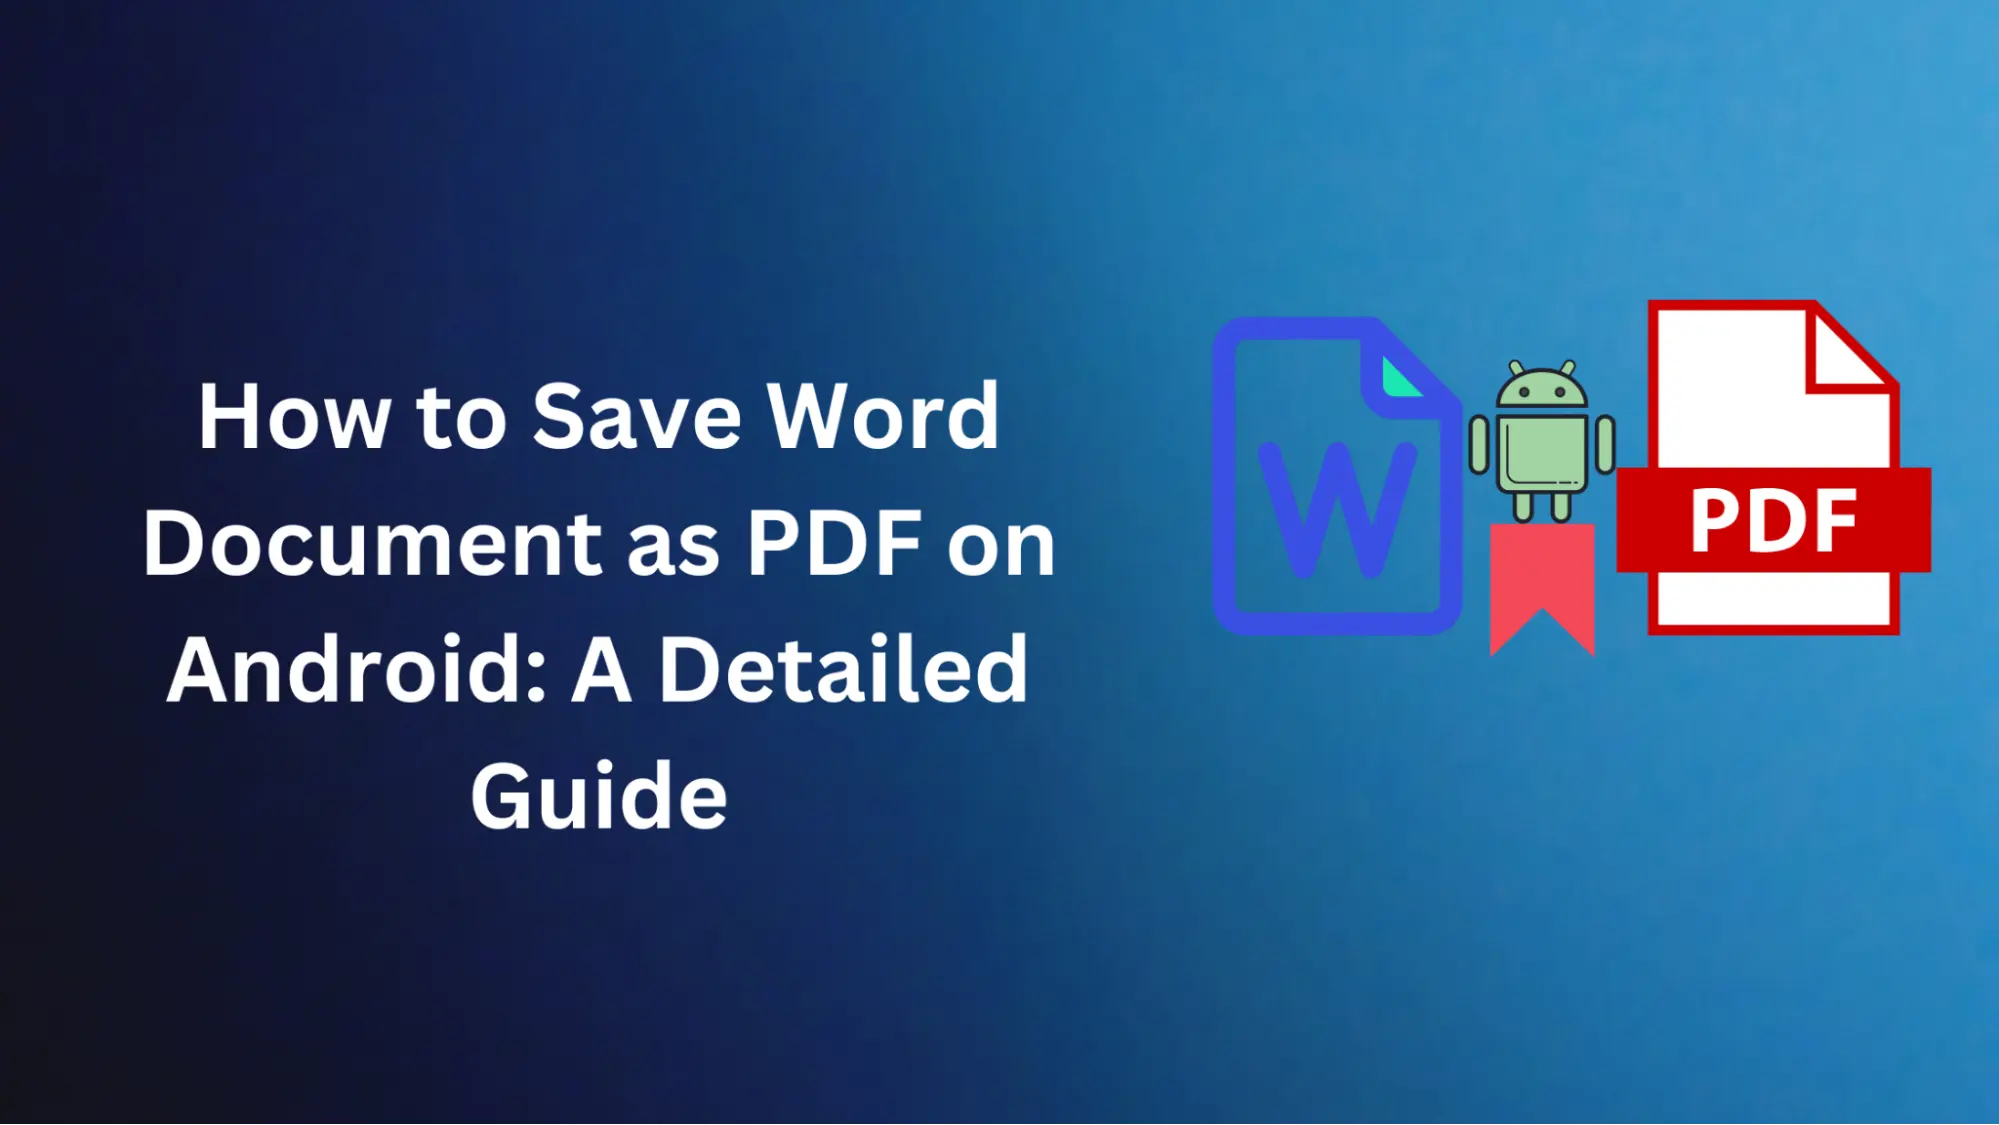 How to Save Word Document as PDF on Android: A Detailed Guide